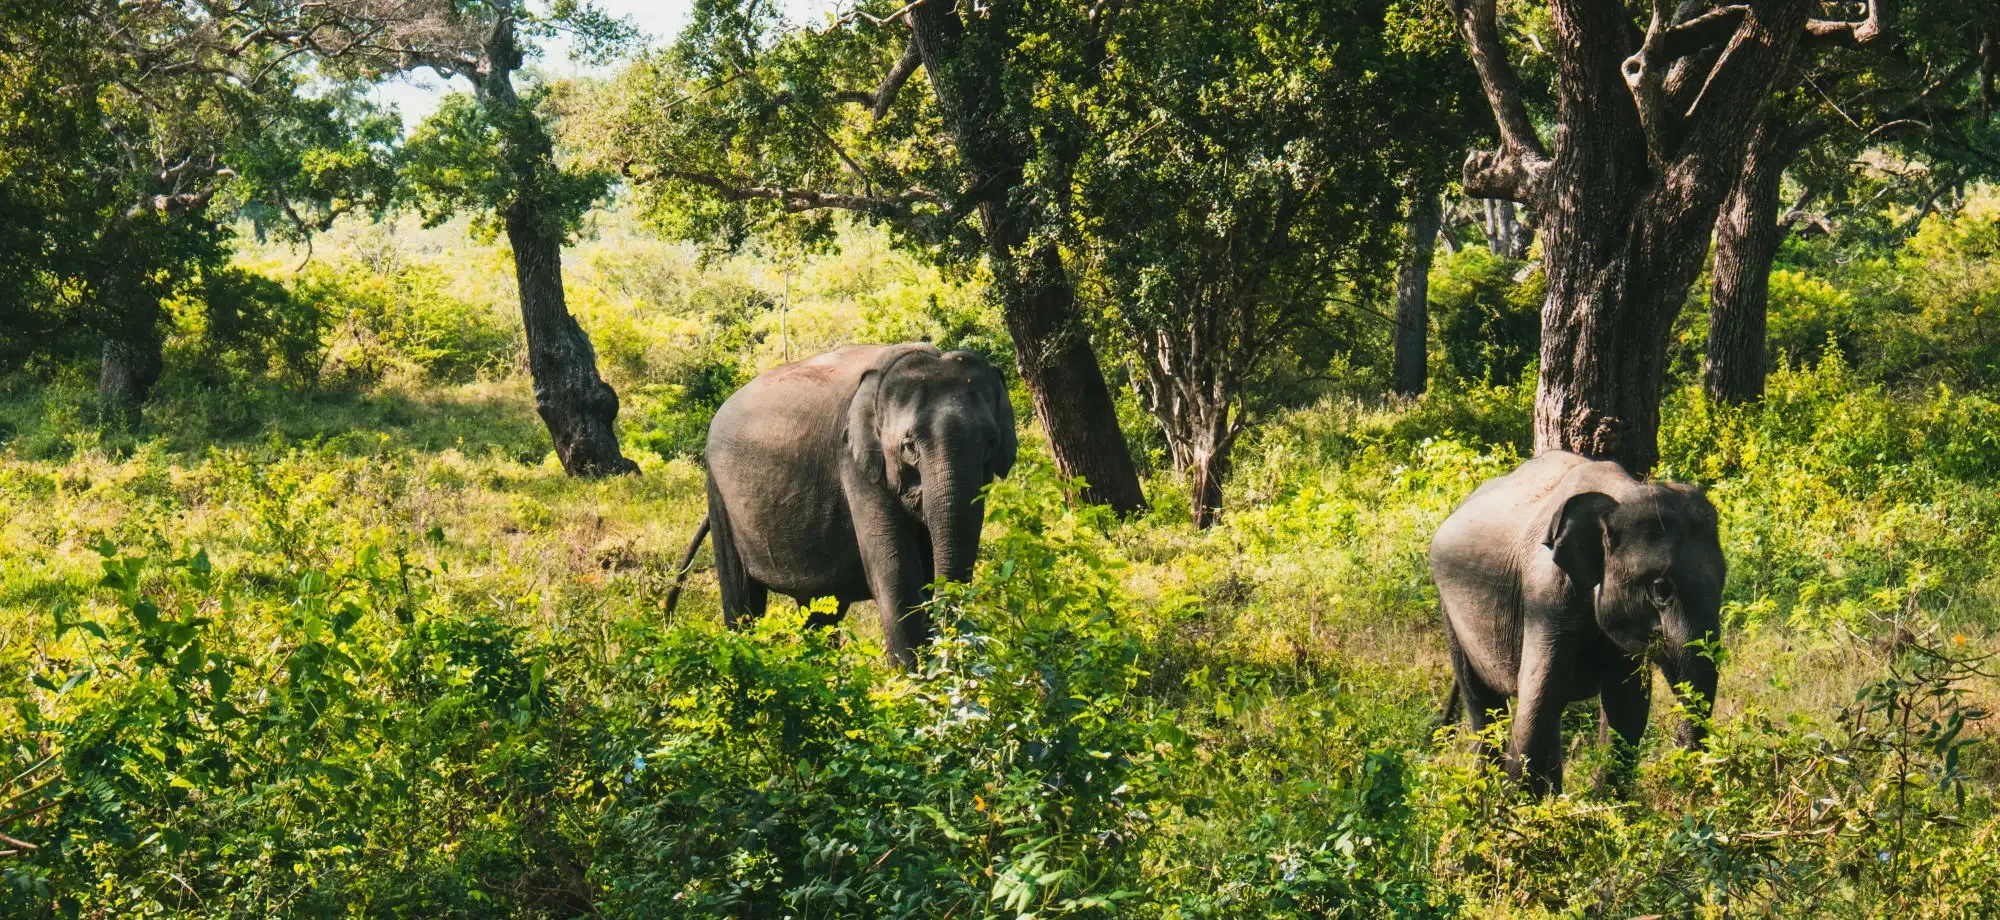 Elephants in the countryside.